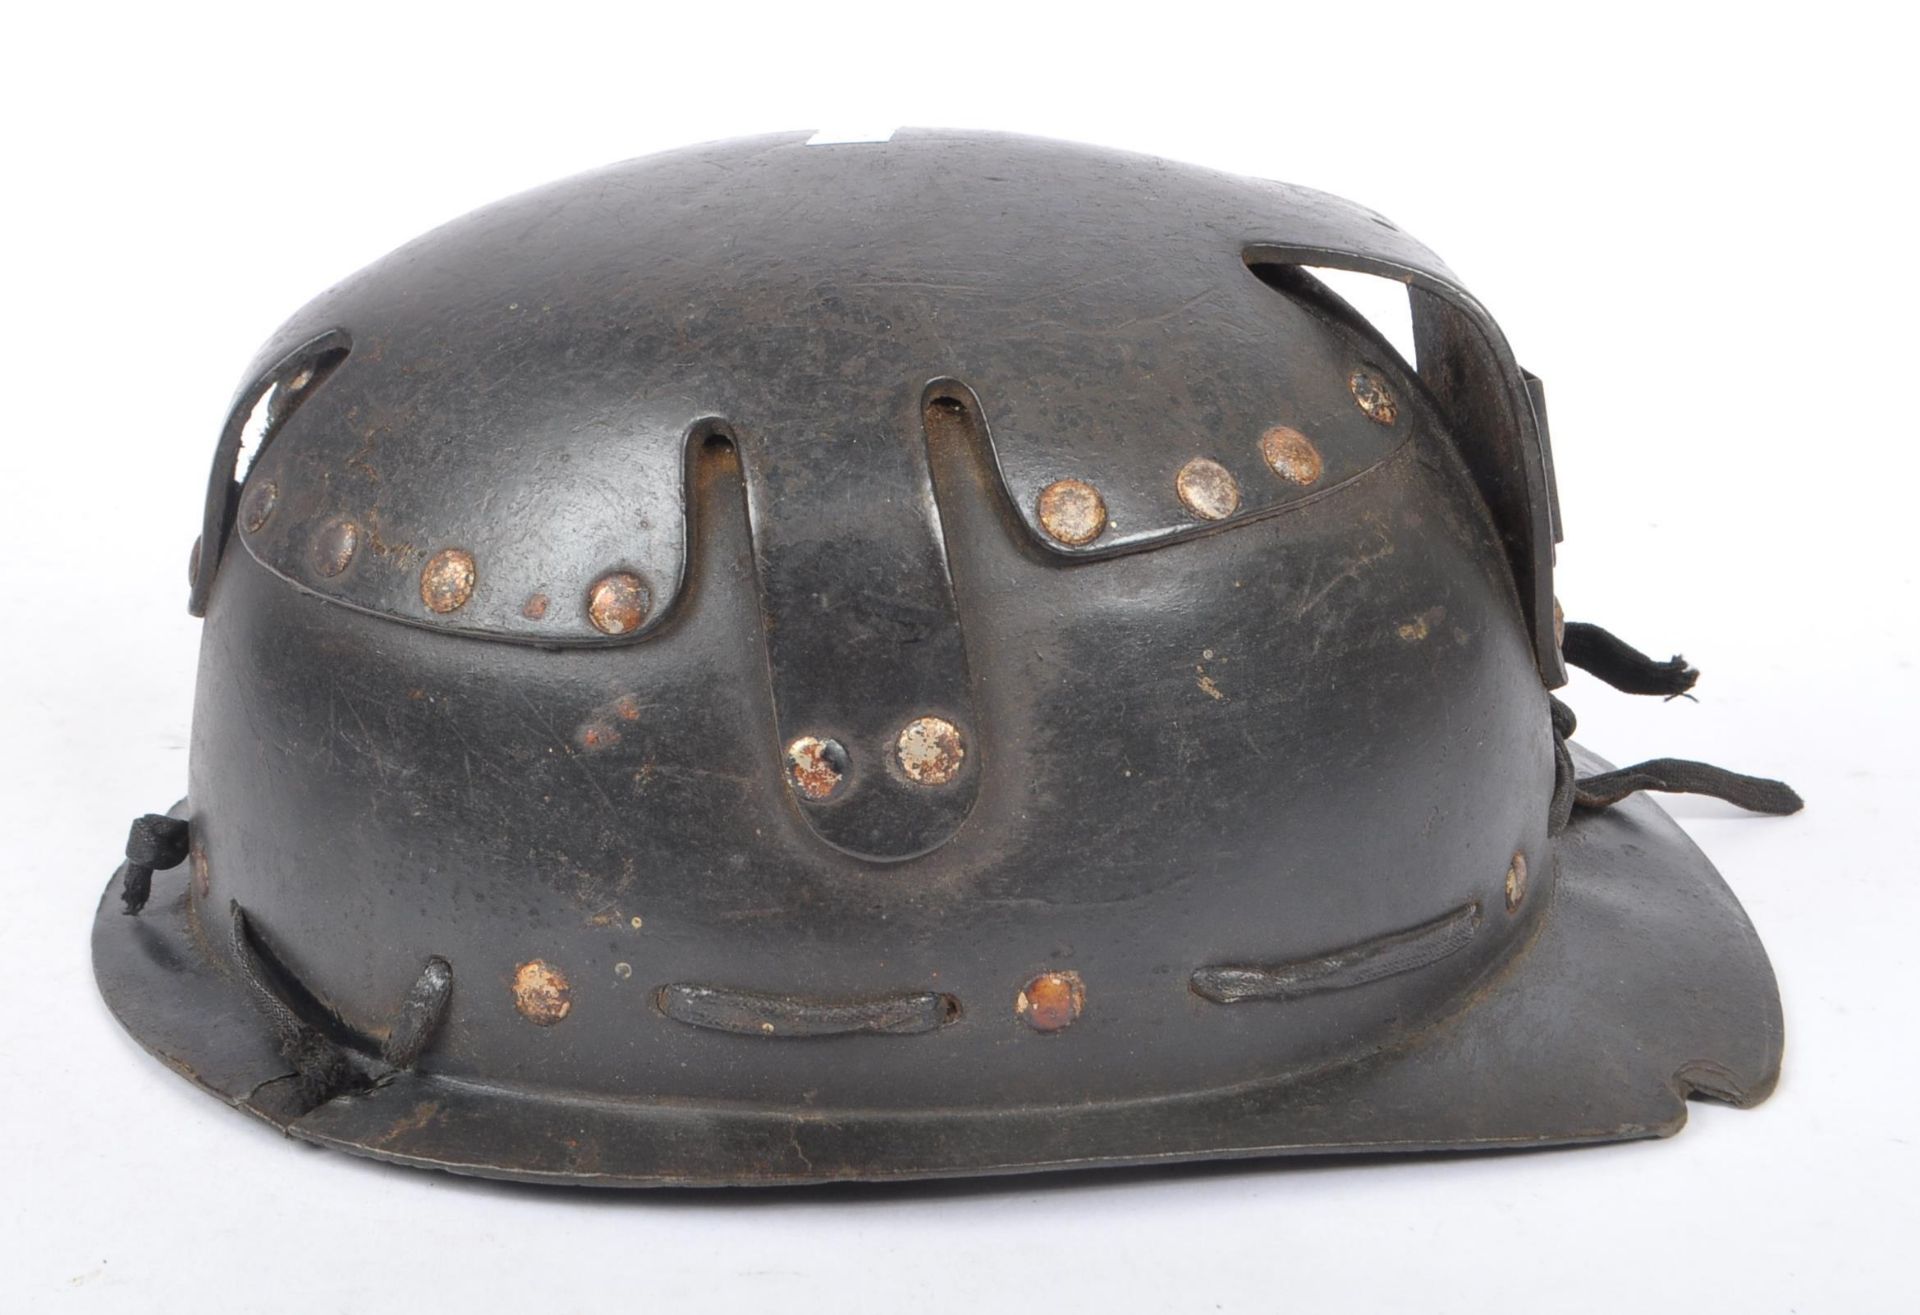 MID CENTURY LEATHER COAL MINERS SAFETY HELMET - Image 5 of 7